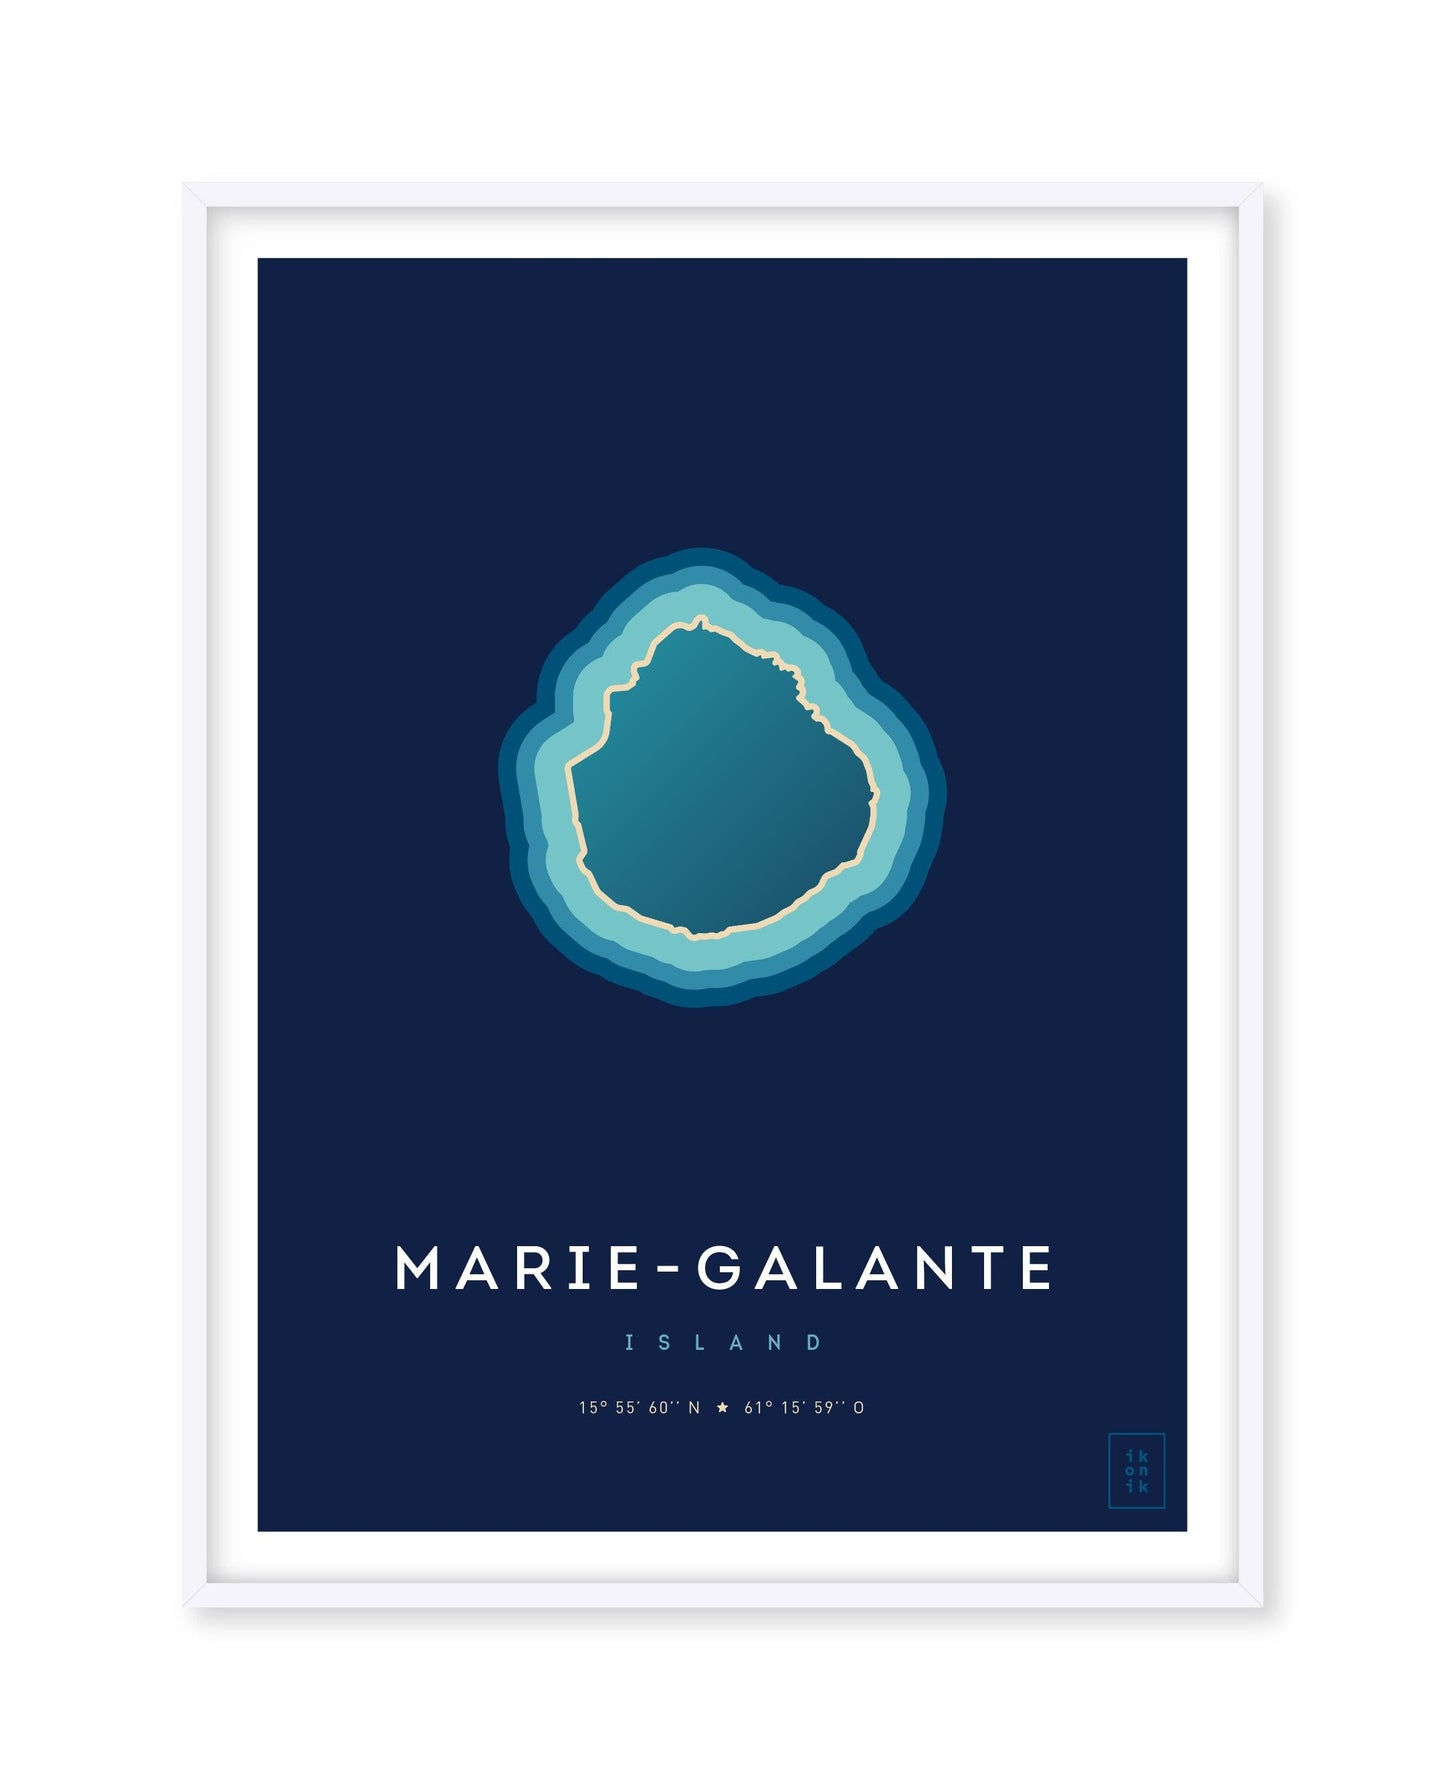 Poster of the island of Marie-Galante